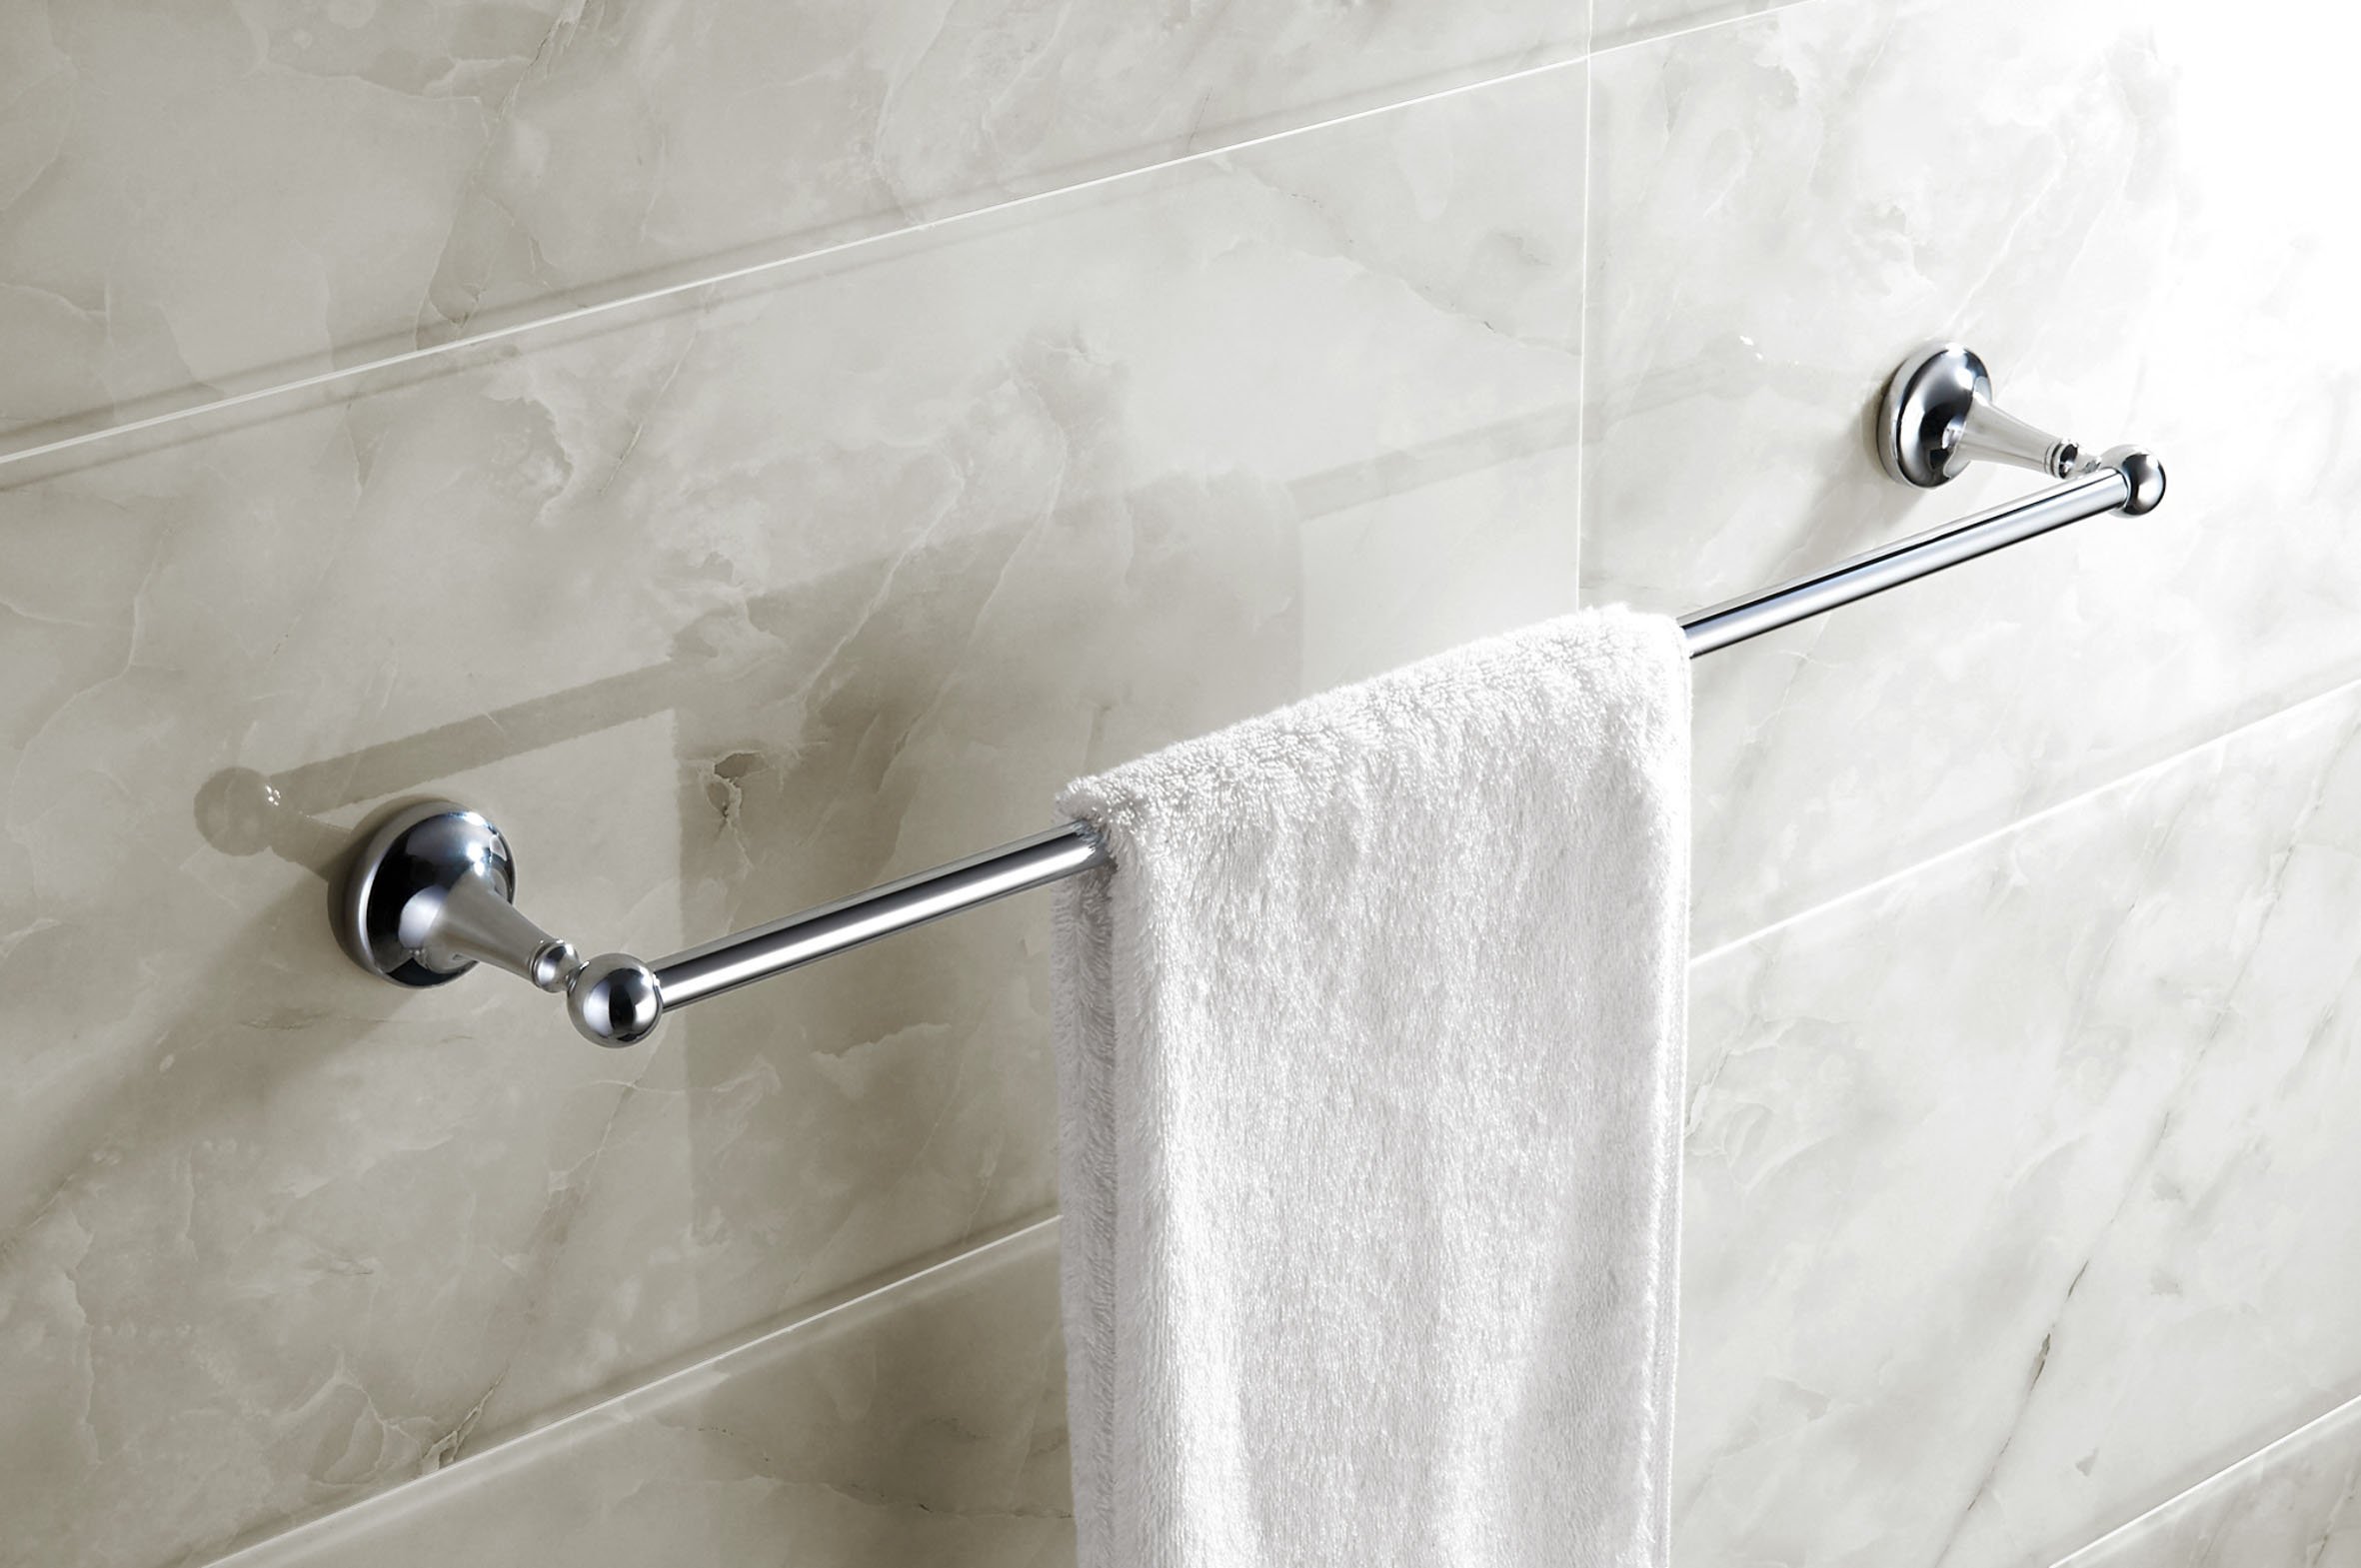 How to Fit a Towel Rail